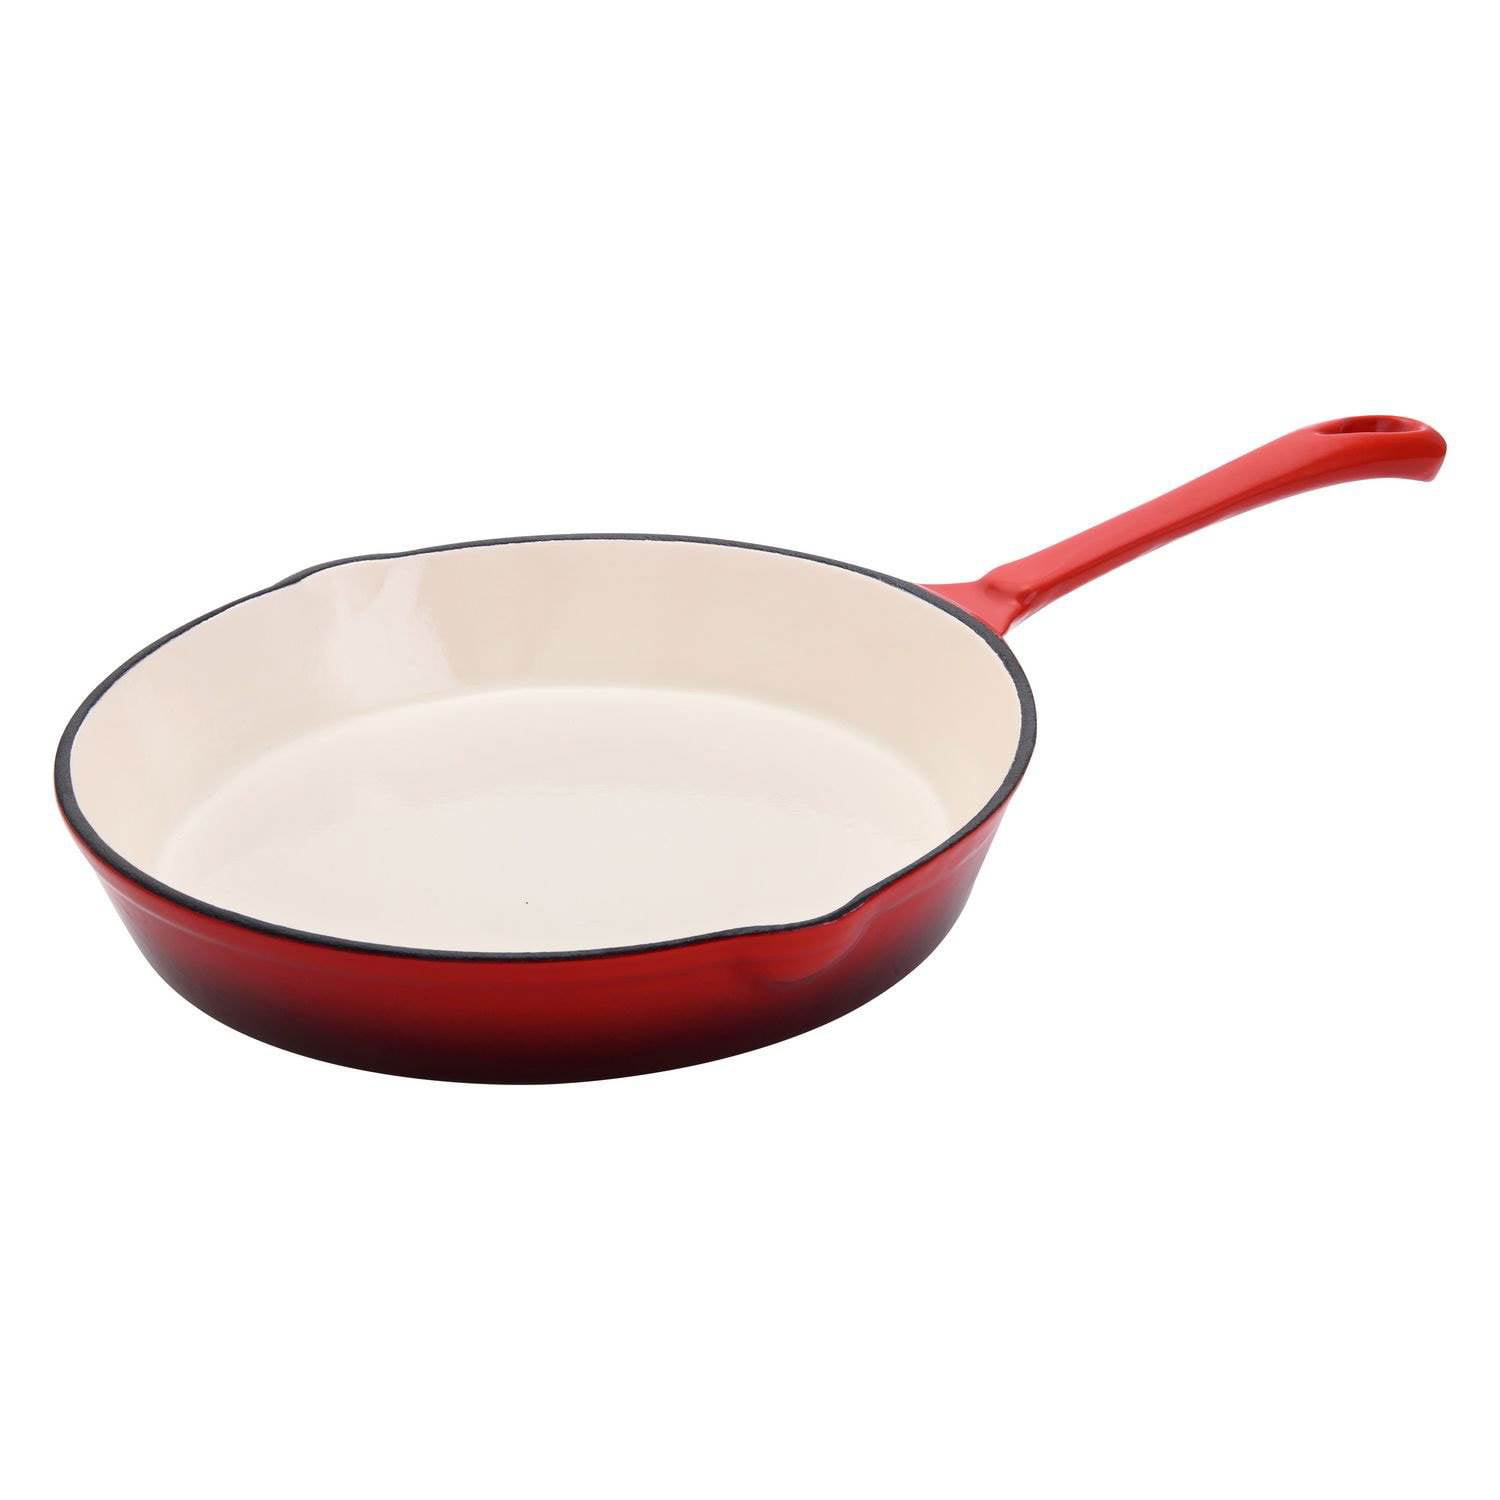 Hamilton Beach 8 Inch Enameled Coated Solid Cast Iron Frying Pan